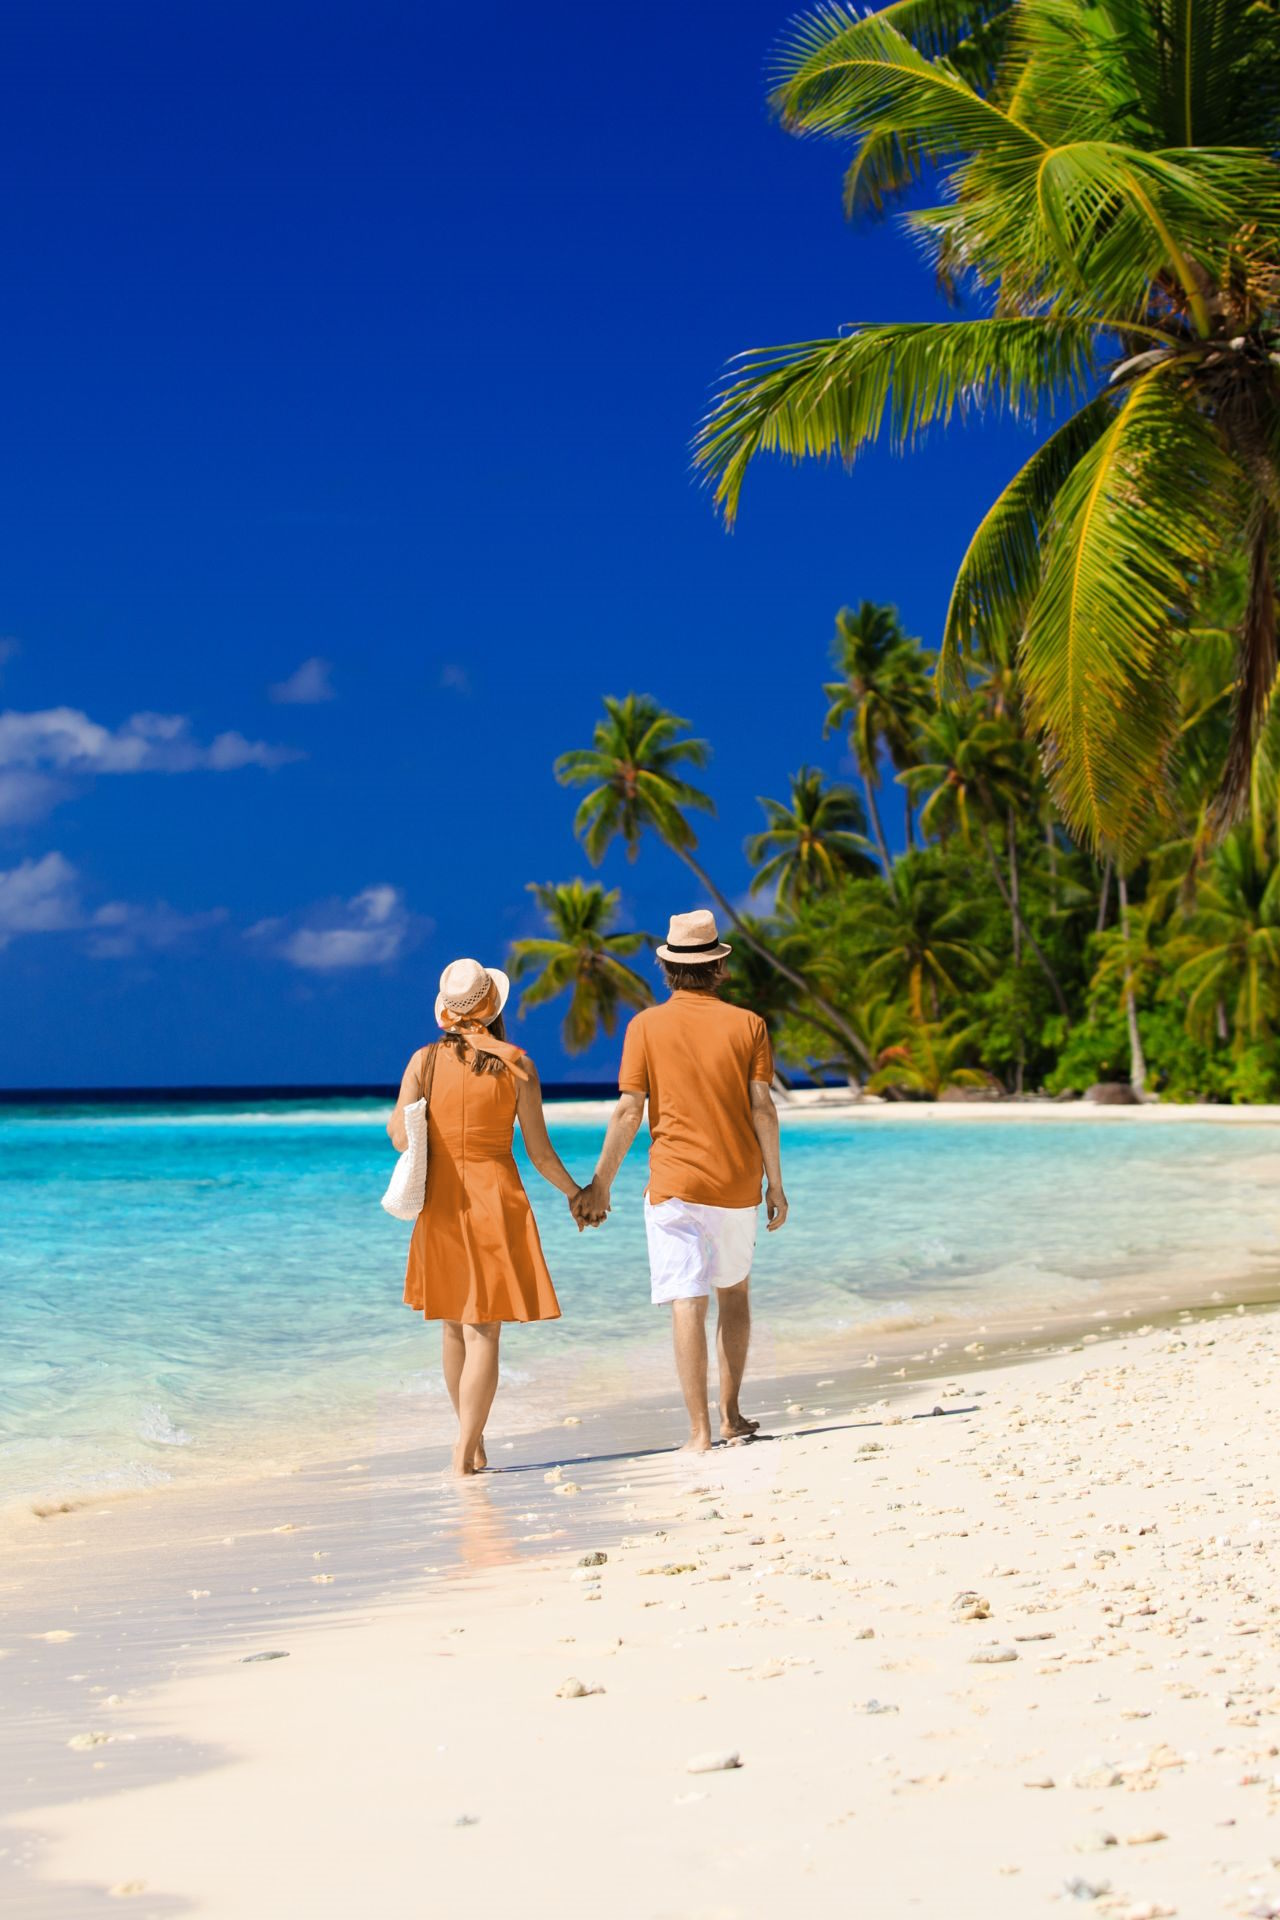 A man and woman walk on the beach holding hands.